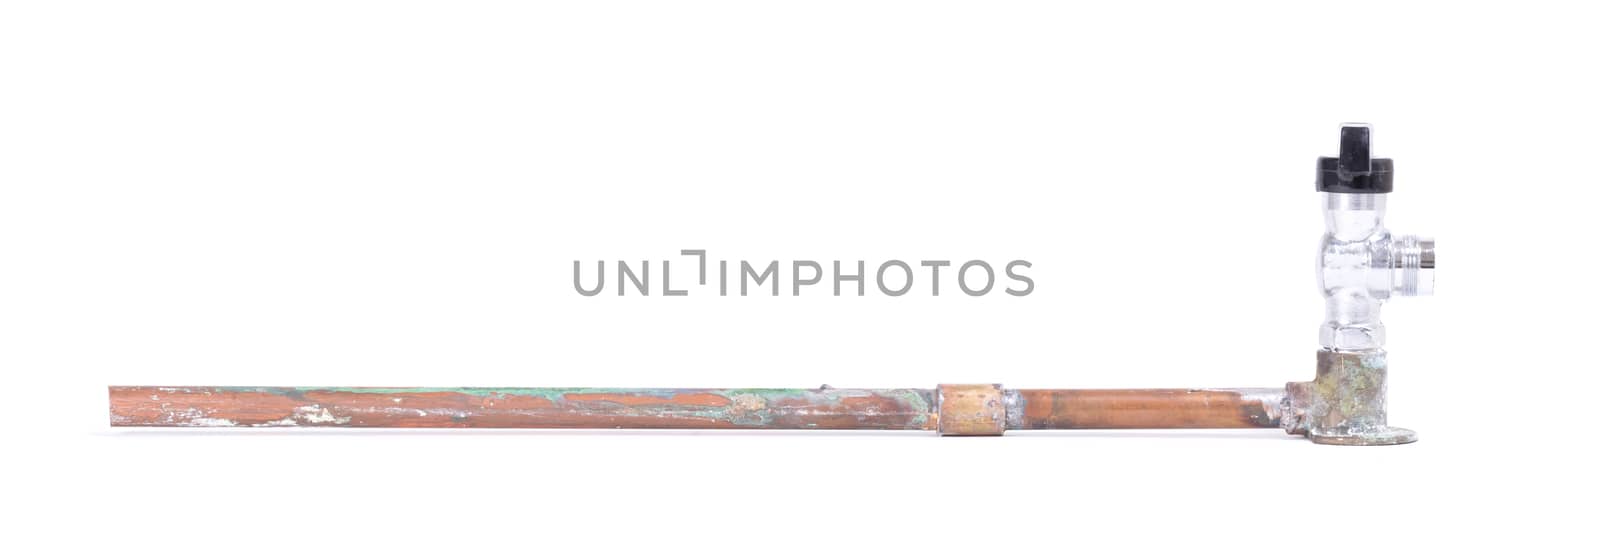 Old brass pipe with metal valve, isolated on a white background